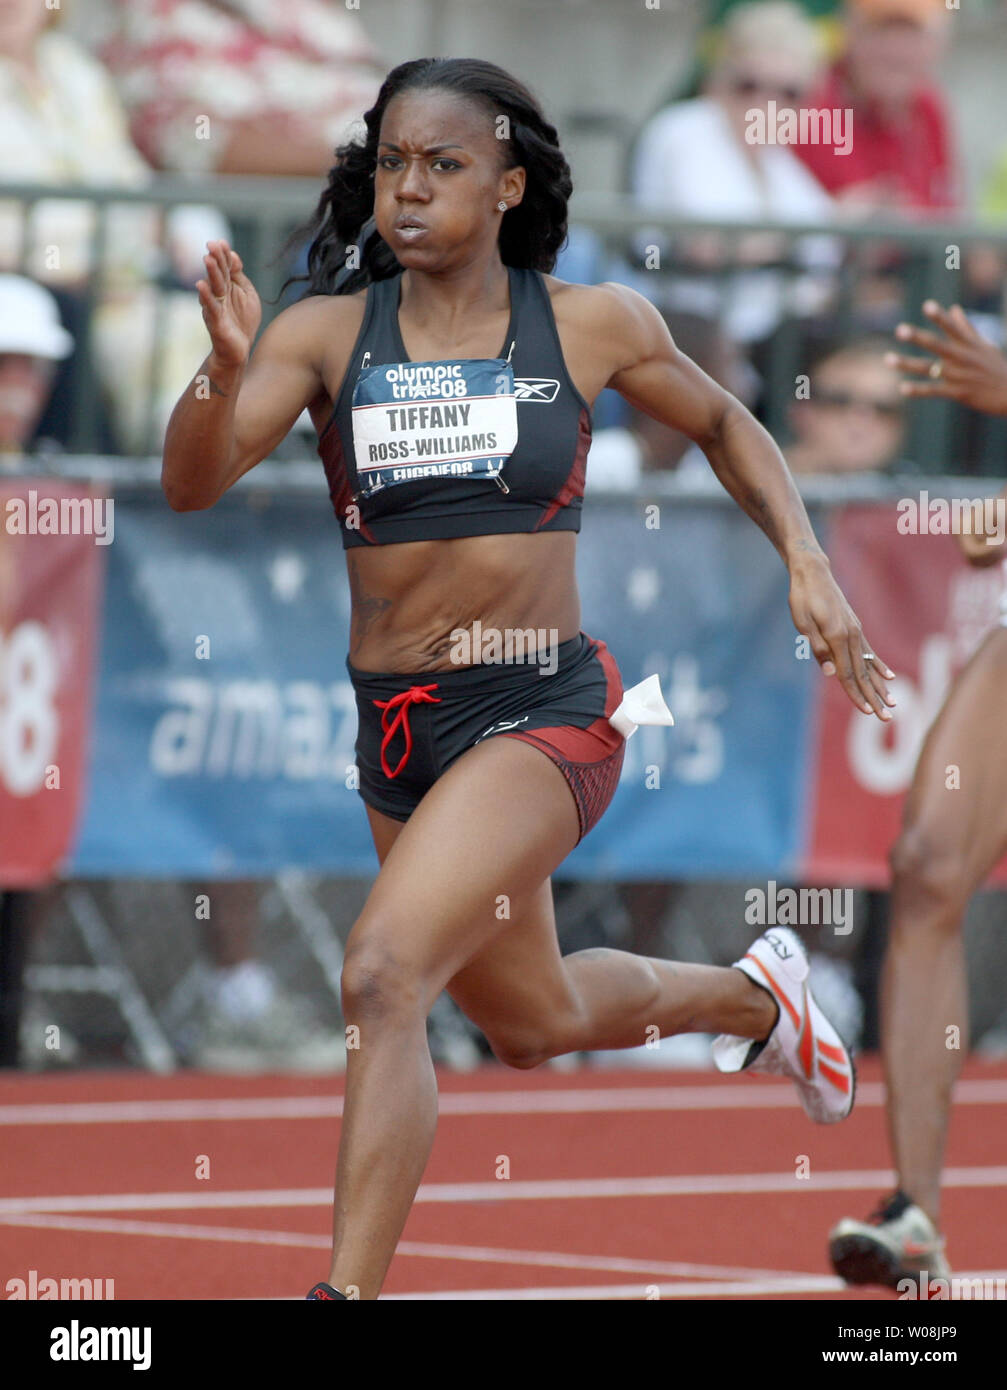 Tiffany Ross-Williams sprints to the finish in the 400 Meter hurdles at the U.S. track and field Olympic trials in Eugene, Oregon on June 29, 2008. Ross-Wiliams ran a 54.03 to win and make the U.S. Olympic team.   (UPI Photo/Terry Schmitt) Stock Photo